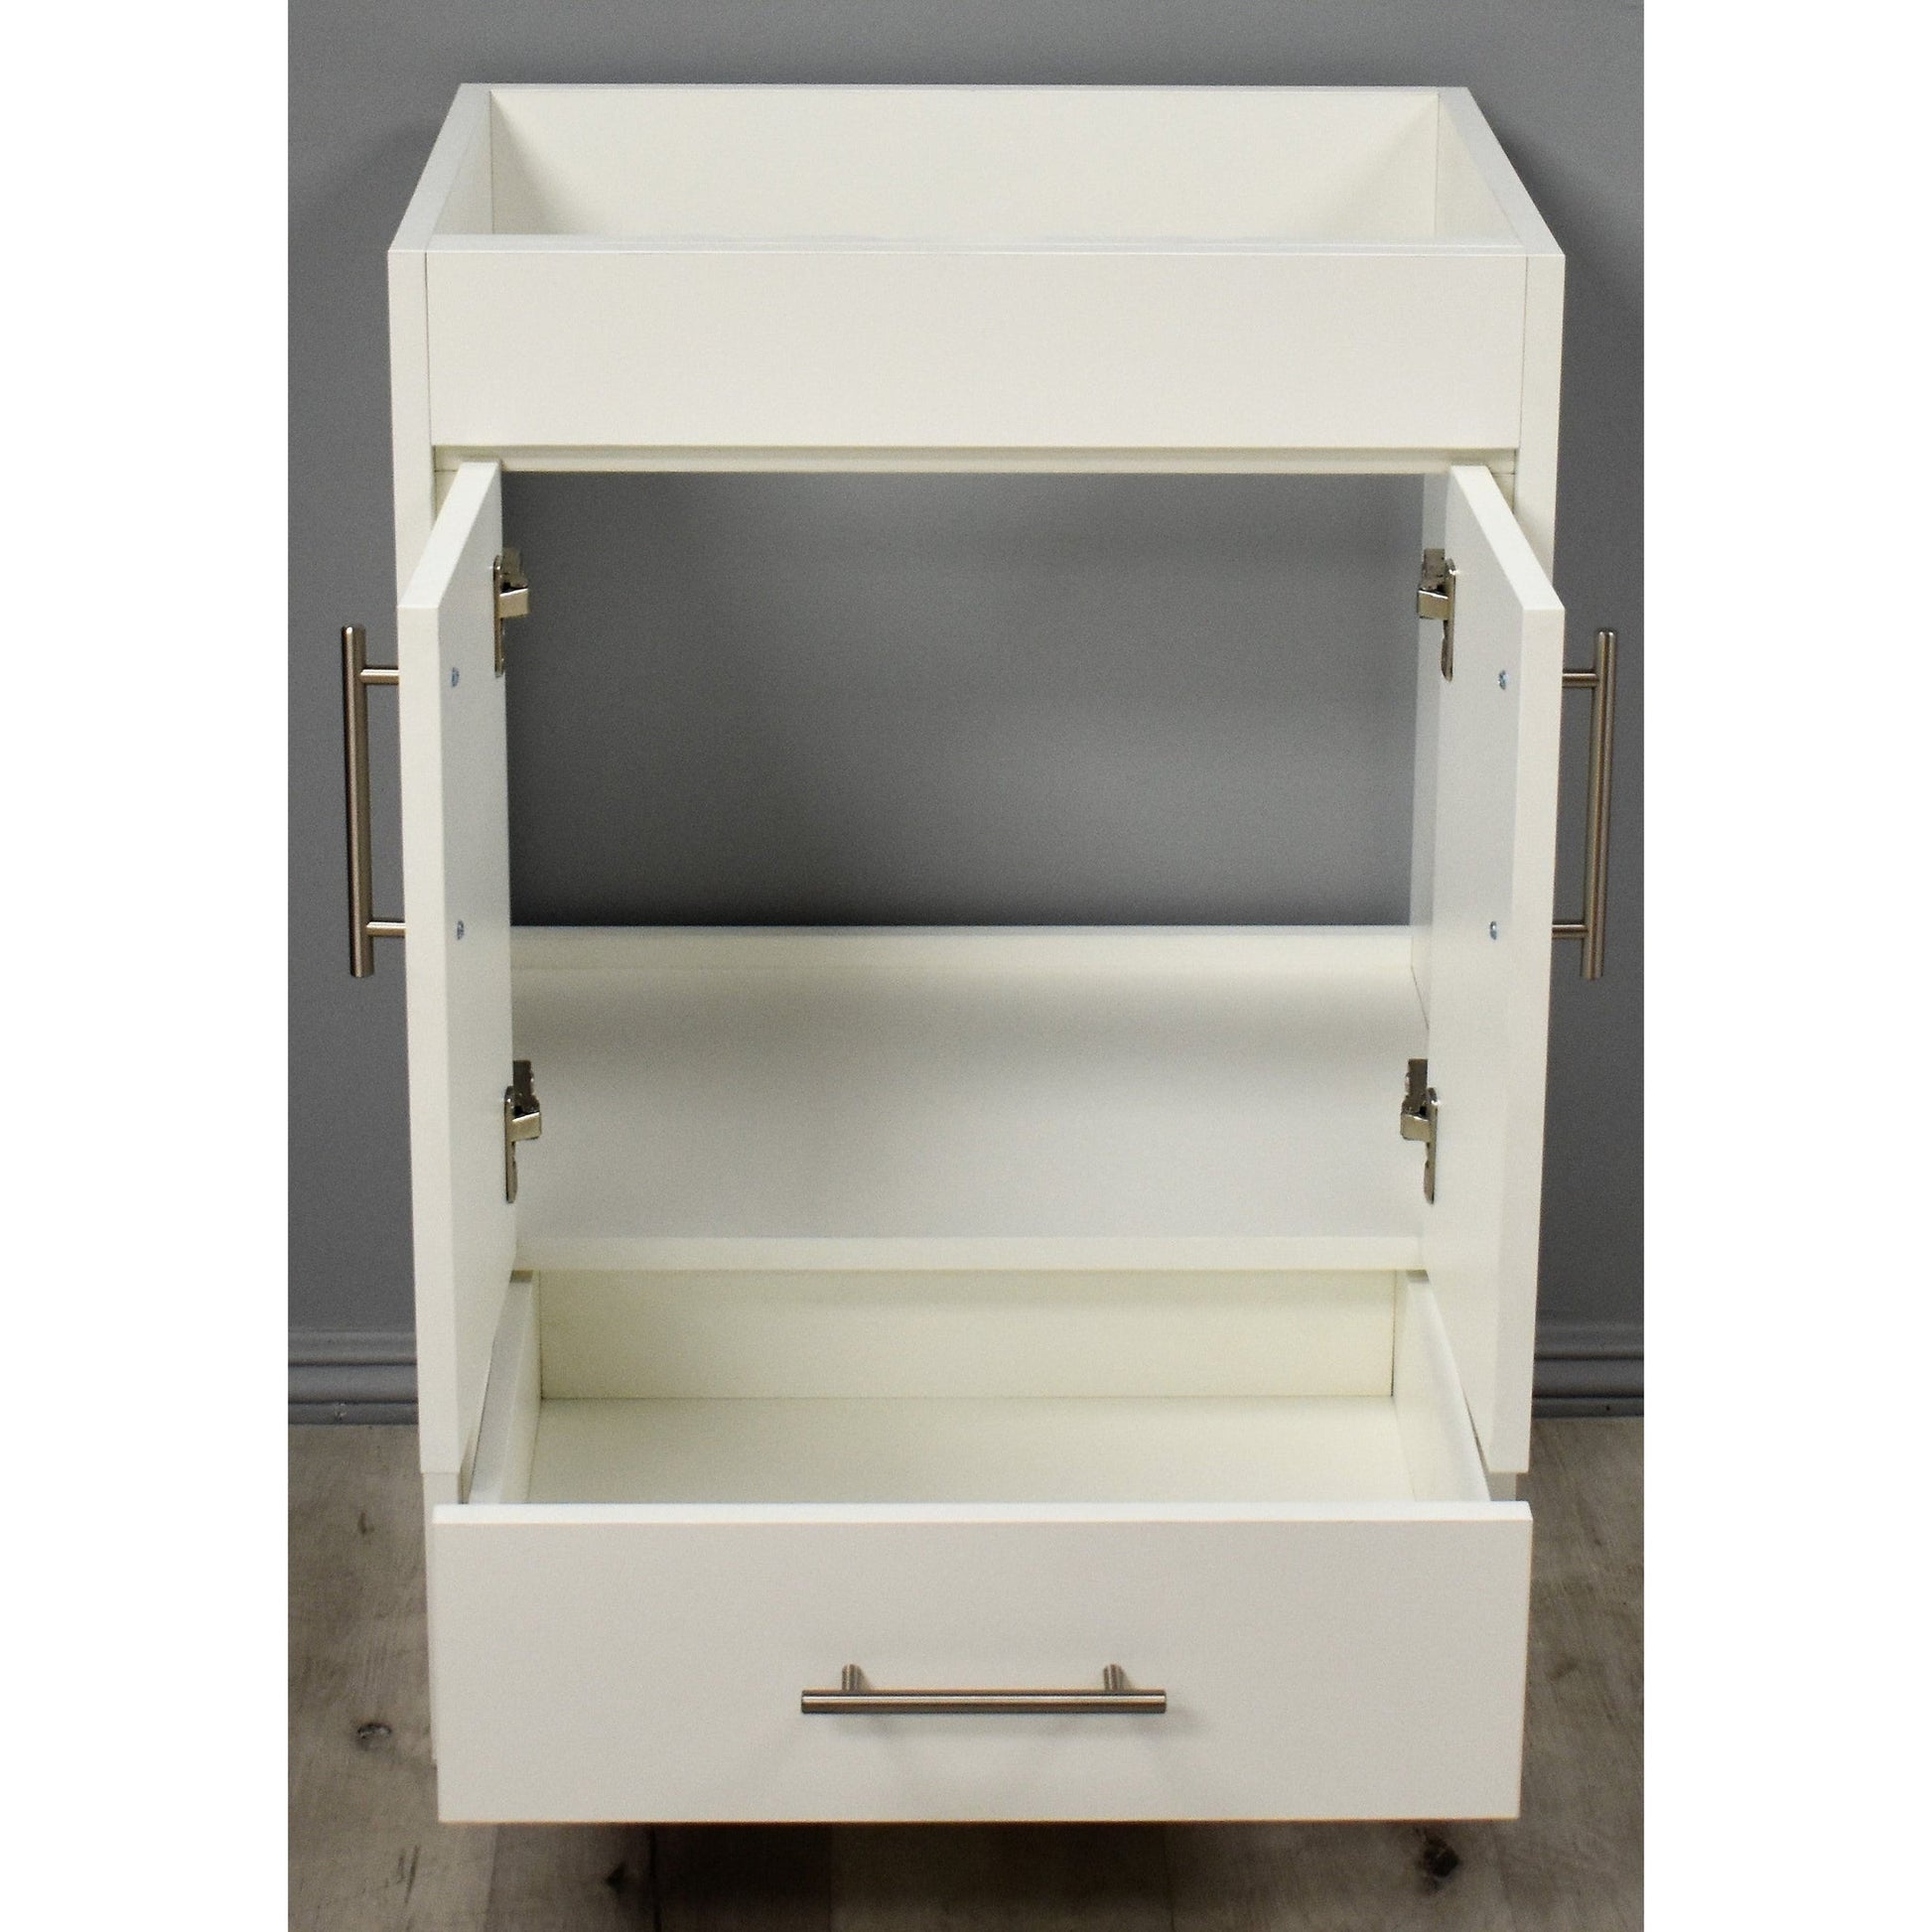 Volpa USA Pacific 24" Soft White Freestanding Modern Bathroom Vanity With Brushed Nickel Round Handles Cabinet Only